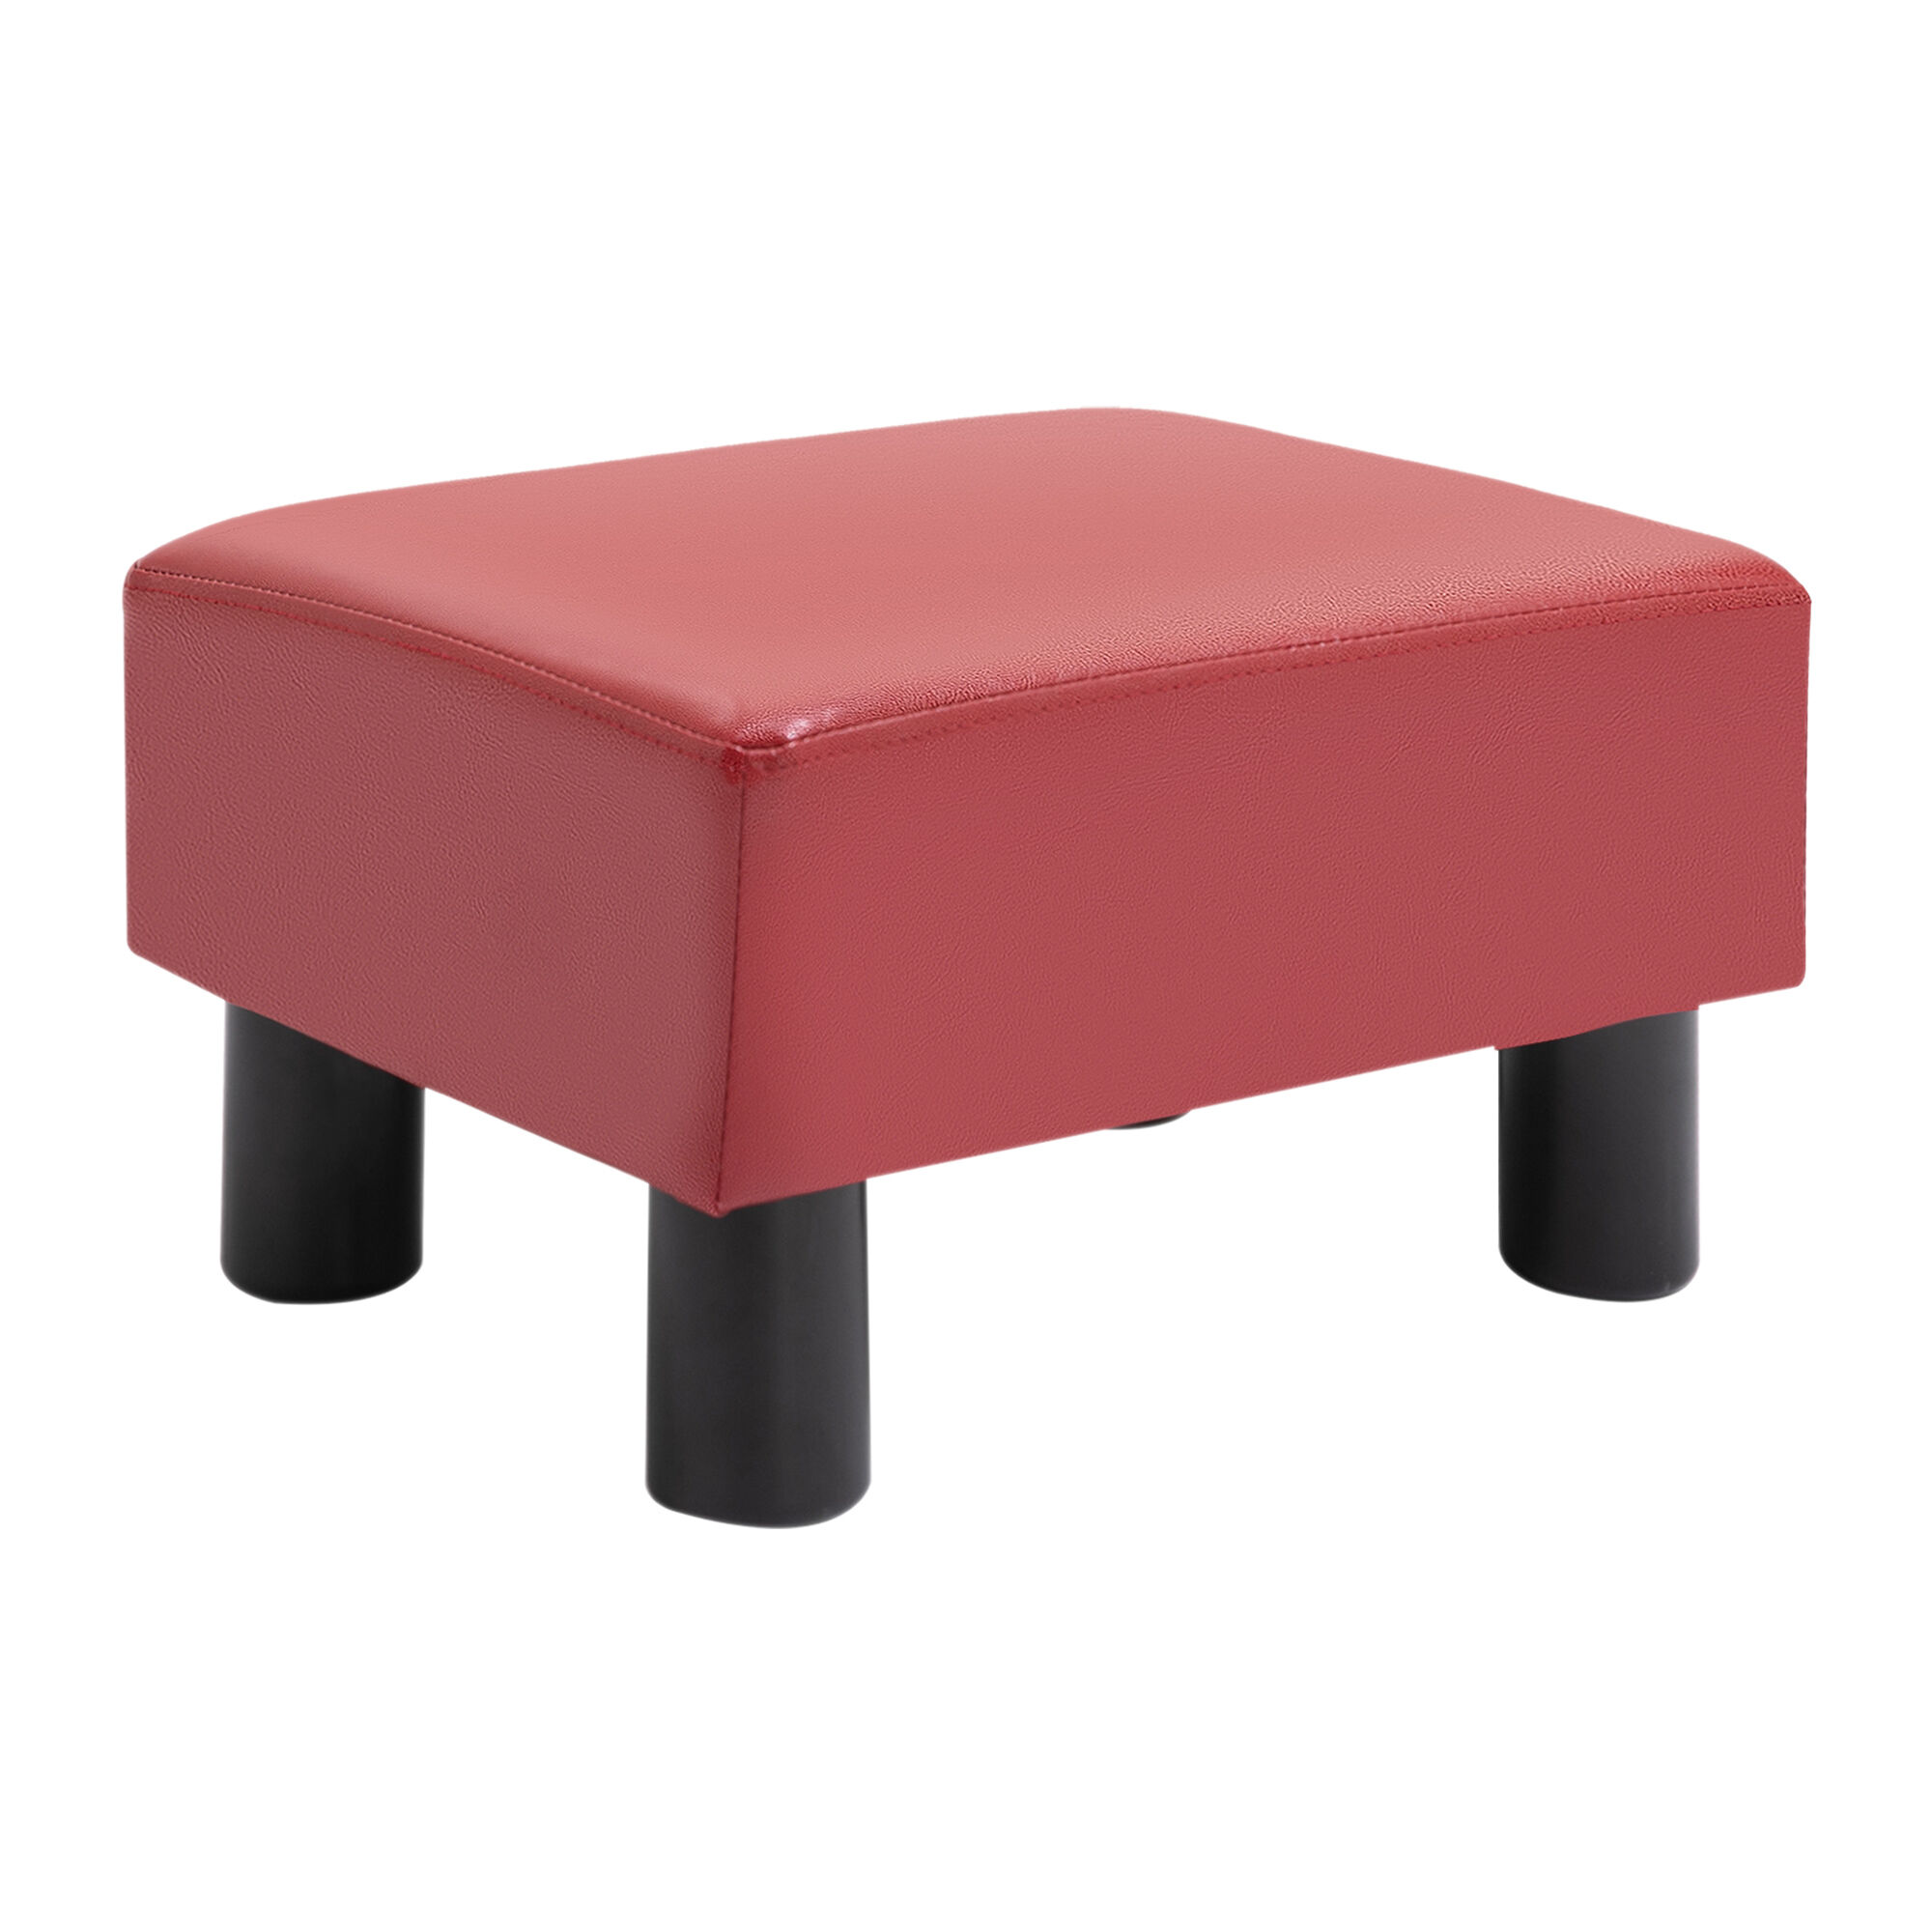 HOMCOM Ottoman Footrest Modern, Faux Leather, Rectangular with Foam Seat, Red - Ideal for Living Room   Aosom.com